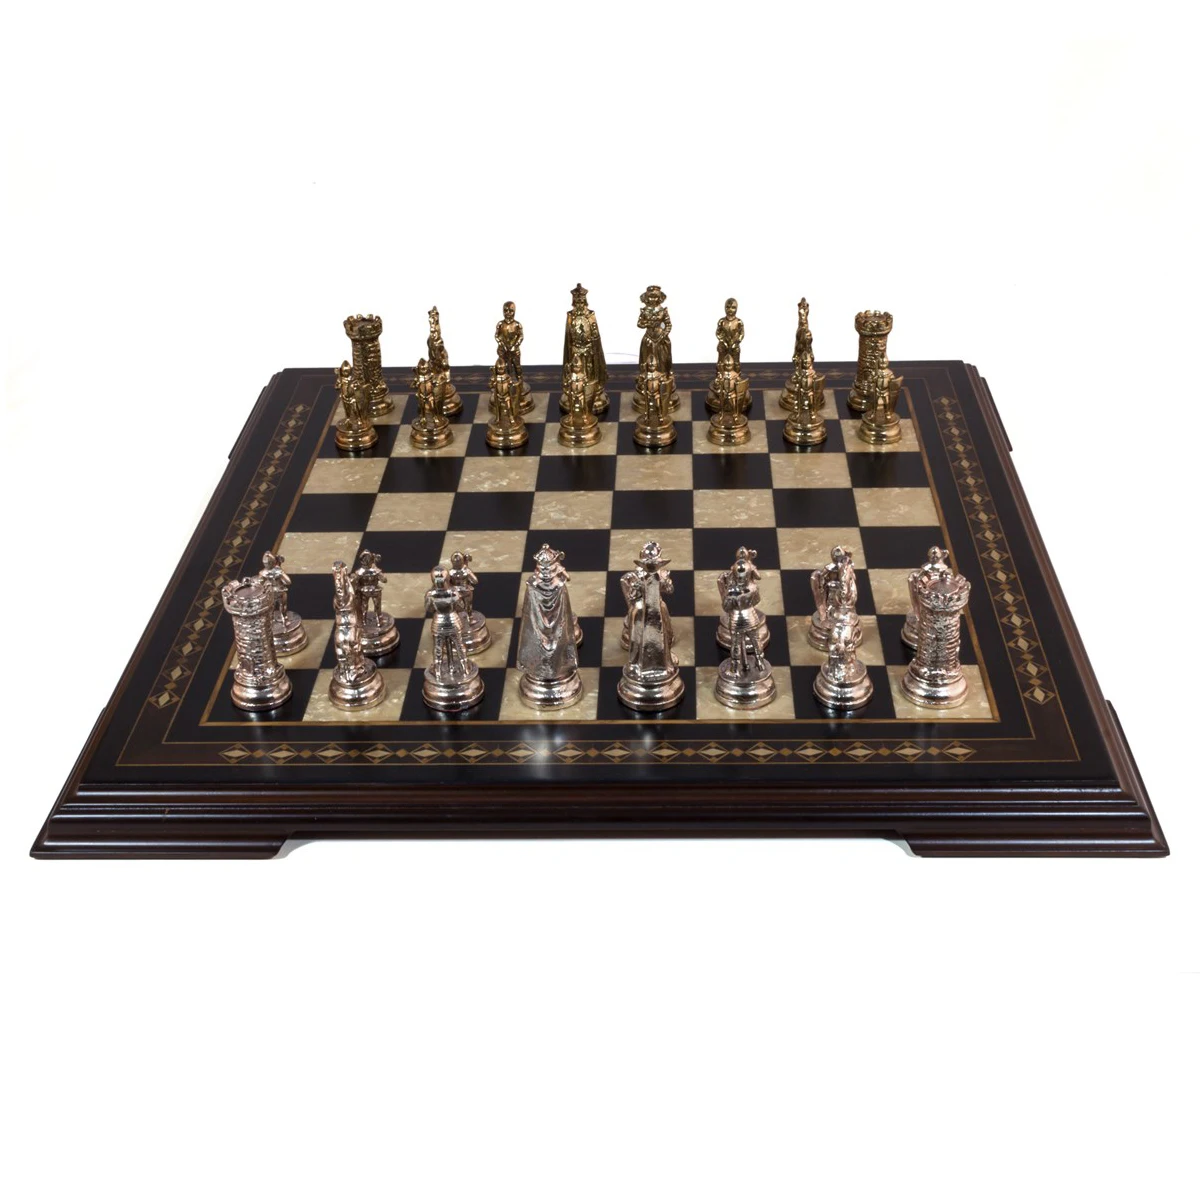 22.5'' Flat Footed Black Chessboard - Solid Beech Wood Mosaic Engraved Chess Board Game Gift Items Deck Box Checkers Шахматы 16 5 flat footed walnut chessboard solid beech wood mosaic engraved chess board game gift items deck box checkers шахматы